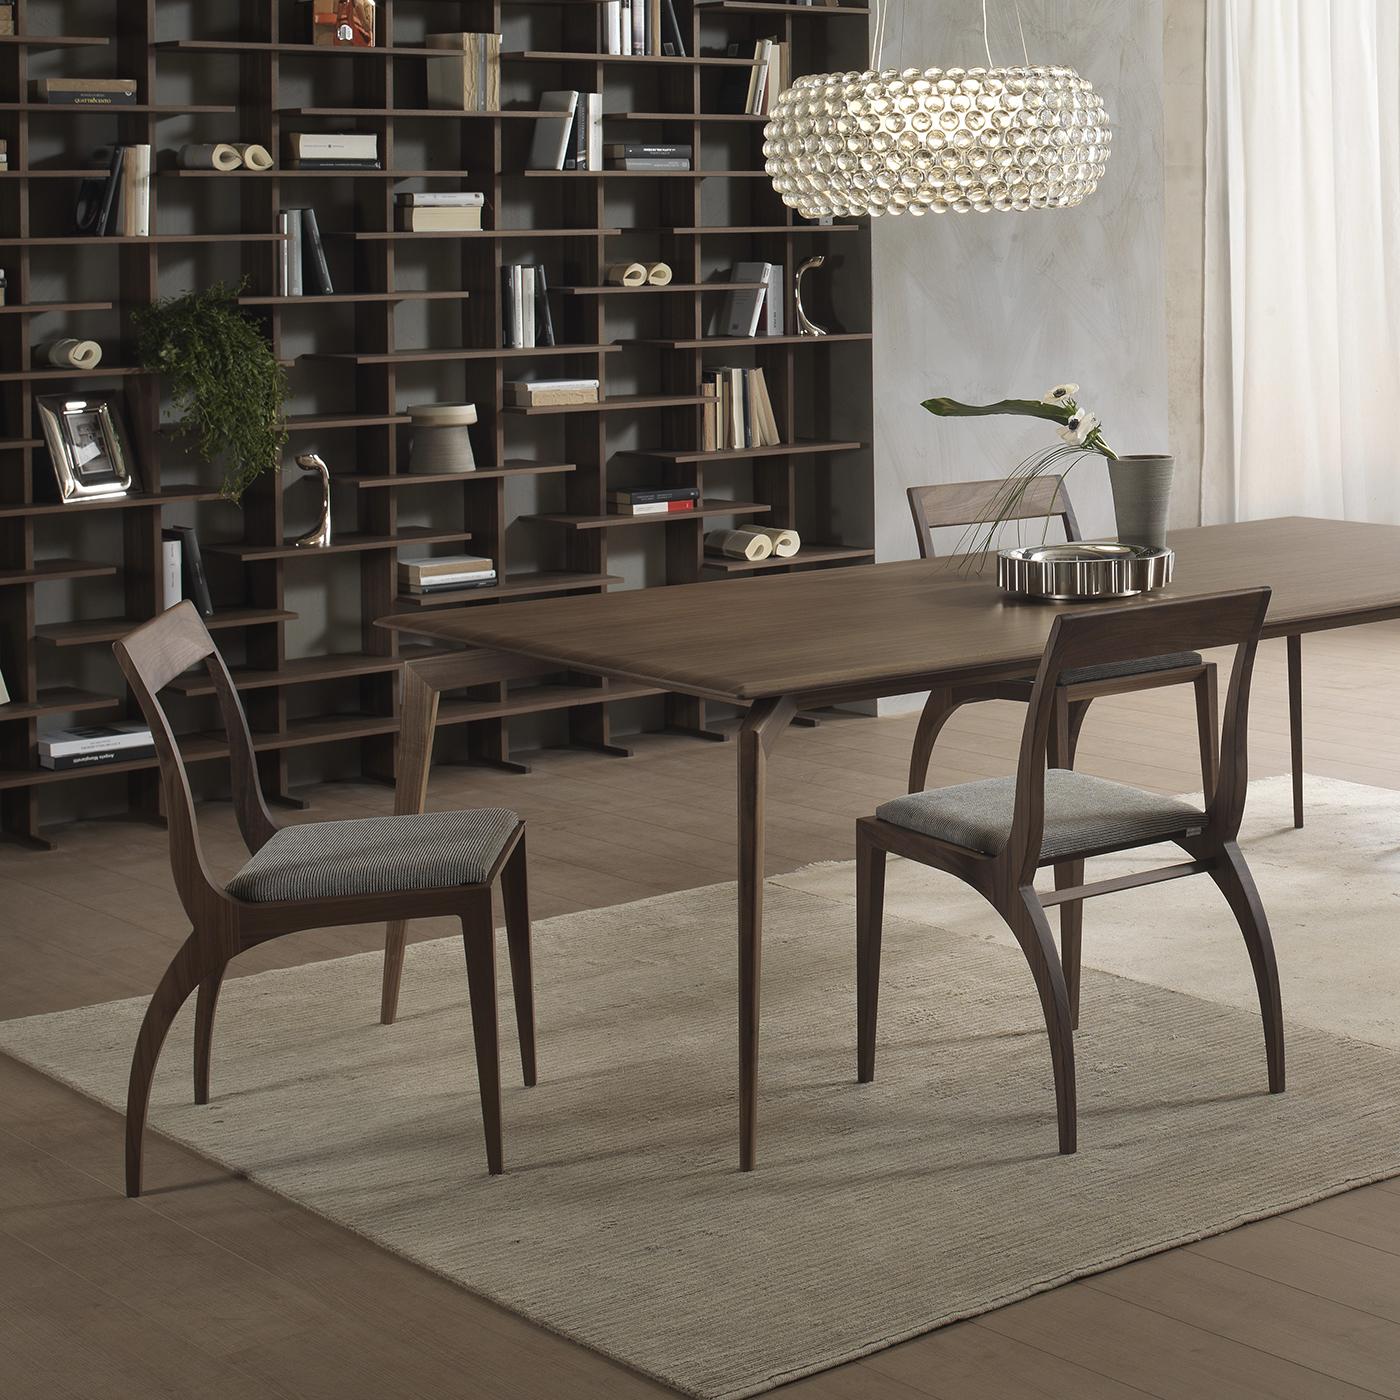 Modern Hope Rectangular Table by Pacini & Cappellini For Sale